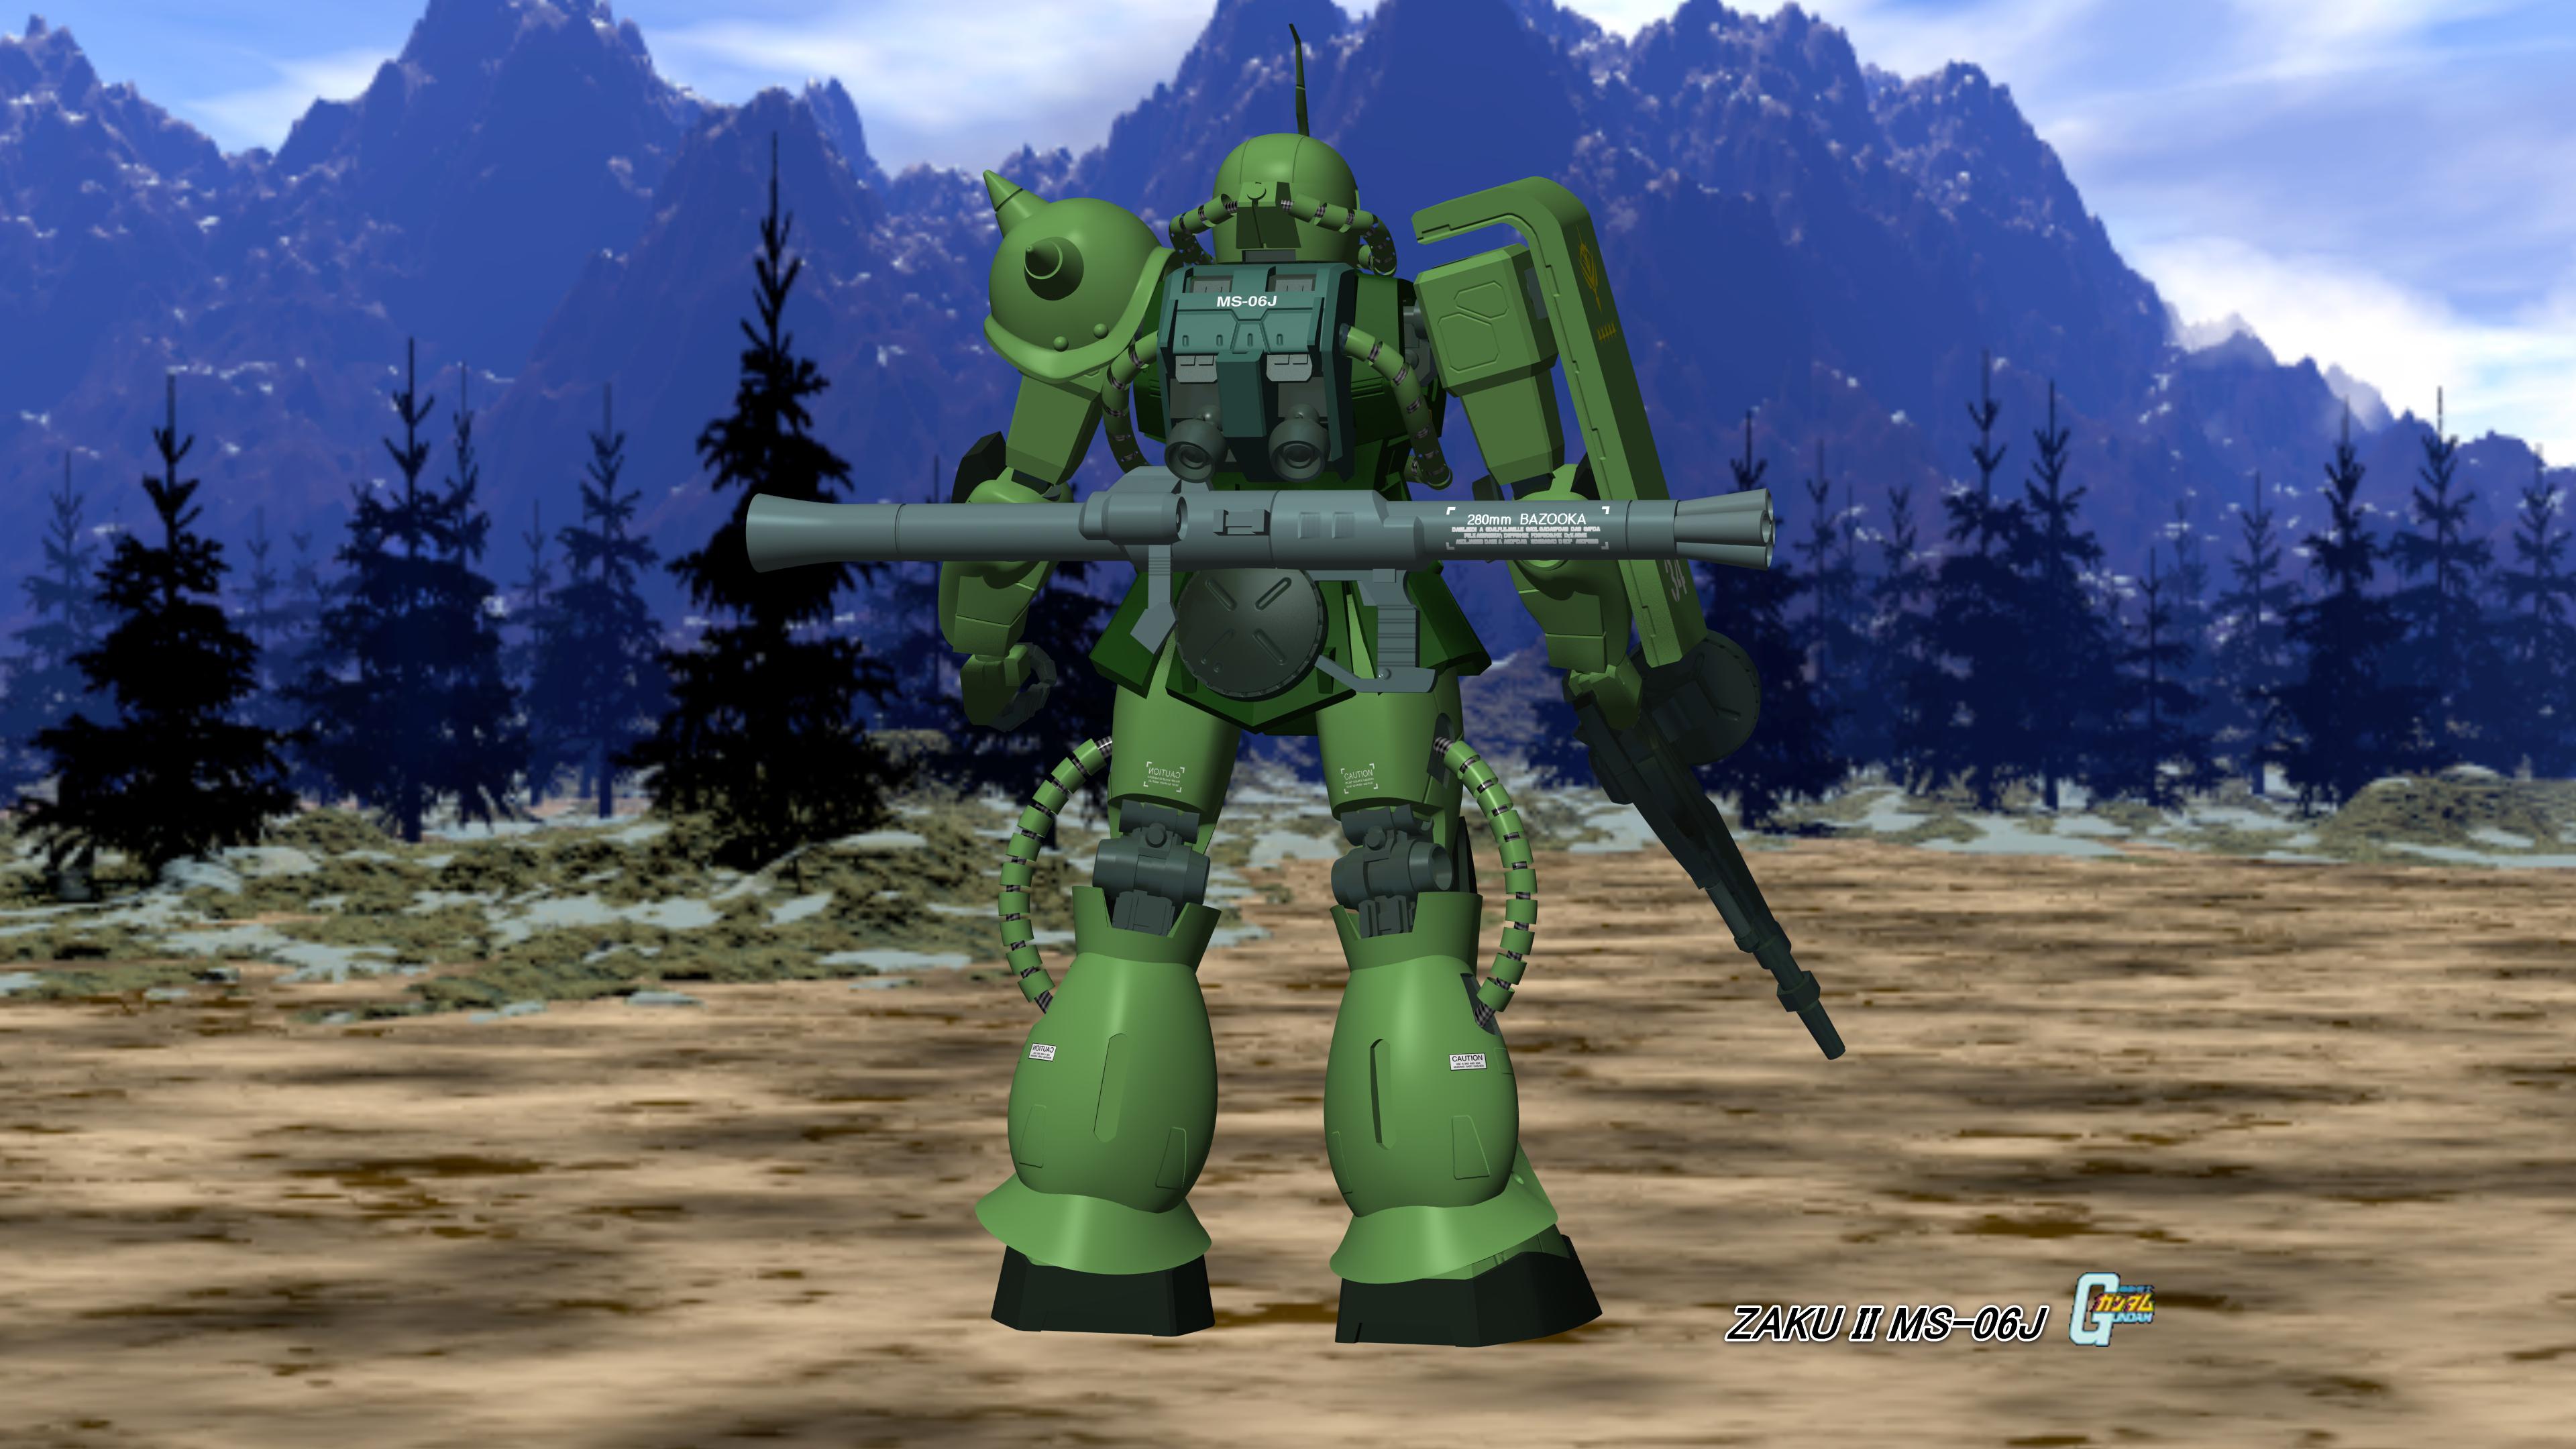 Mobile suit gundam zaku ii ms 06j - - High Quality and other